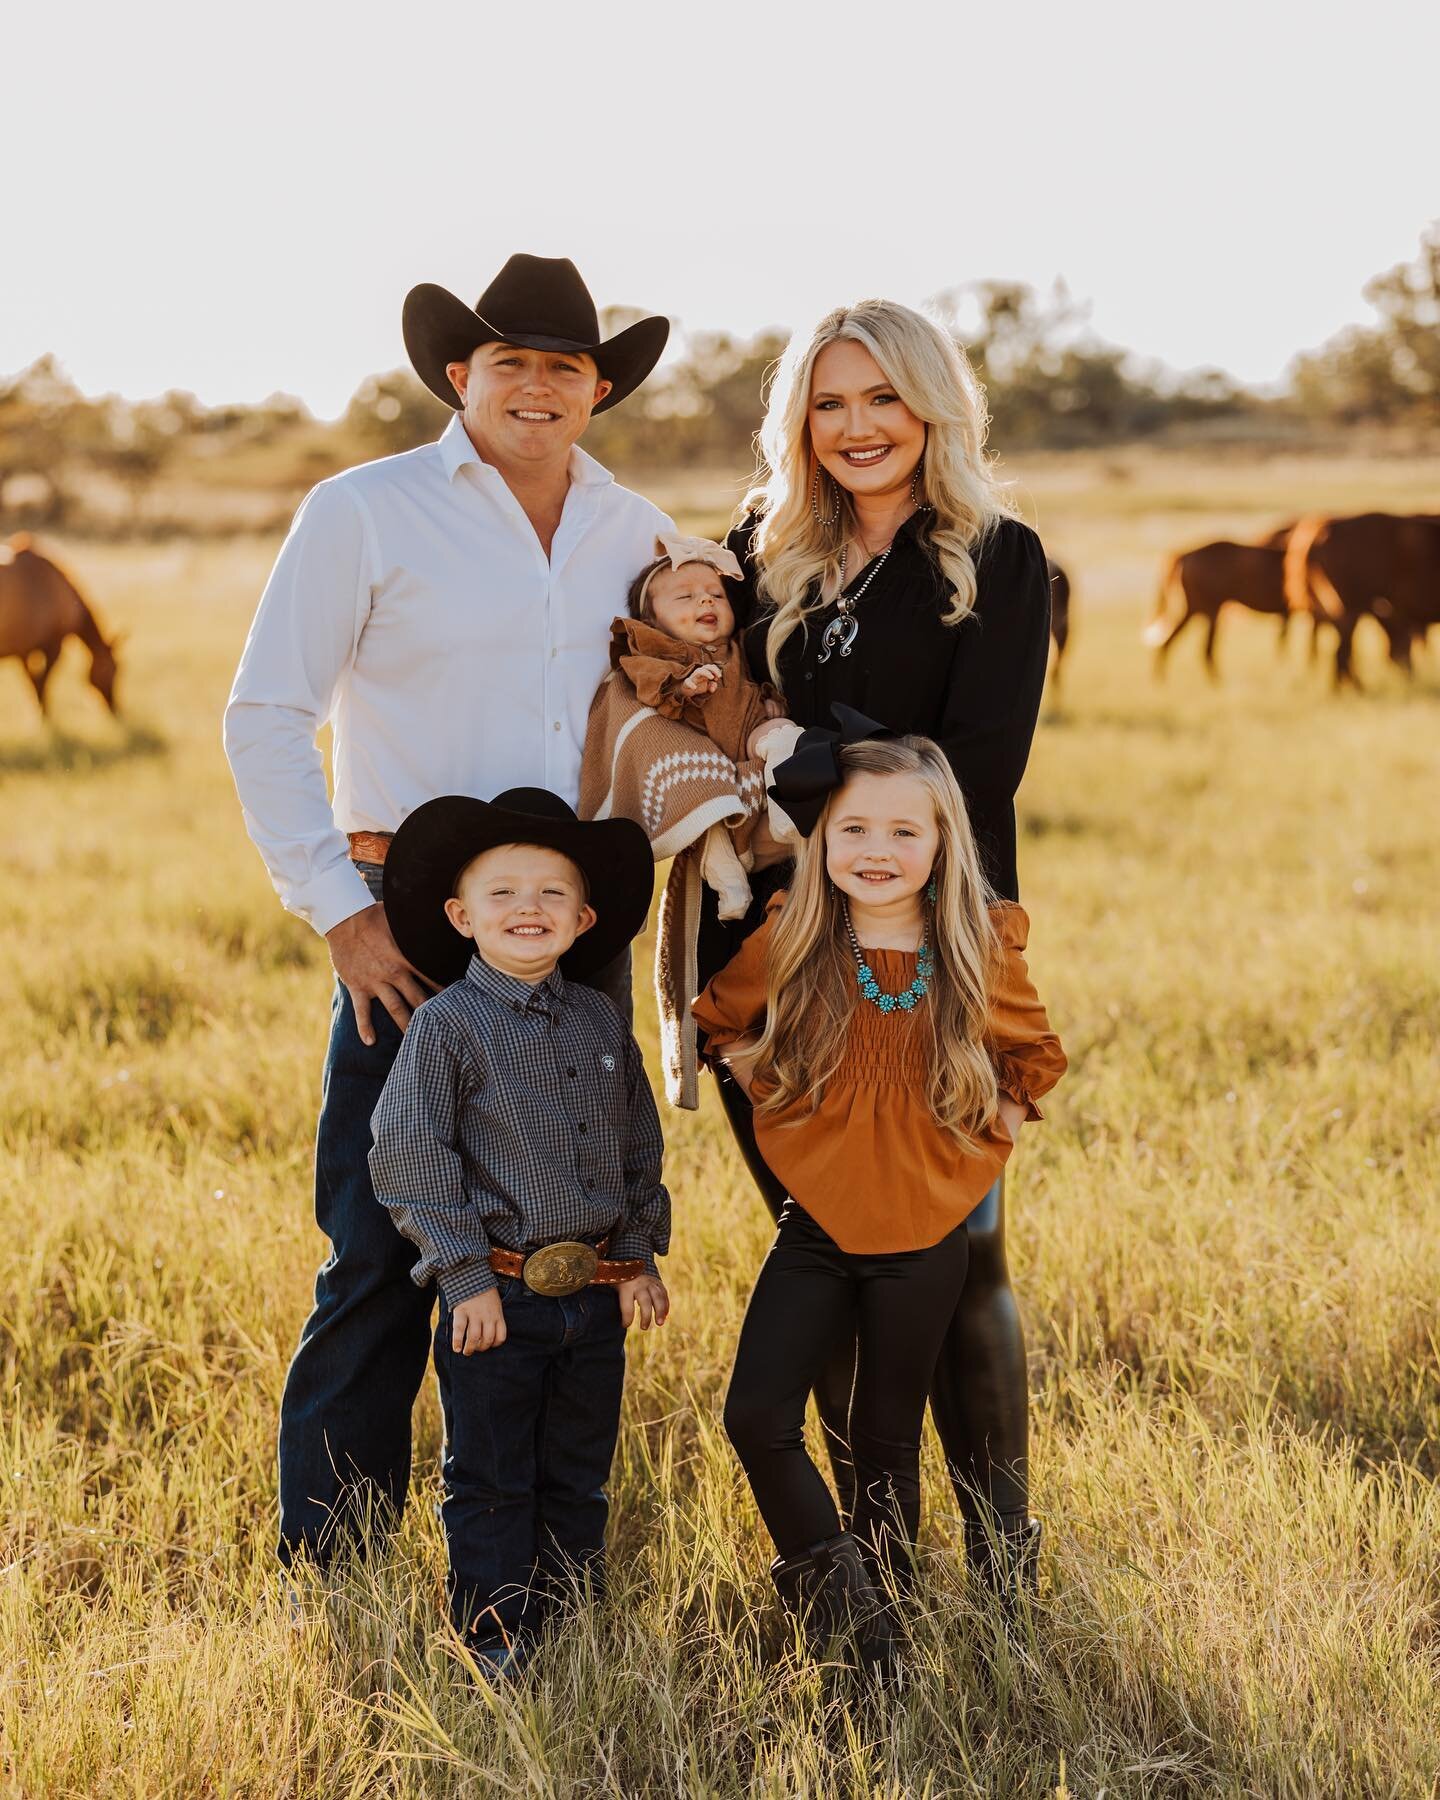 Some of my favorite people are in these photos right here! Sweet baby Anderson fits right into this precious bunch! ❤️
.
.
.
#kristafrancisphotos #familyphotographer #texasfamily #texasfamilysession #texasphotographer #westtexasphotographer #canyonte